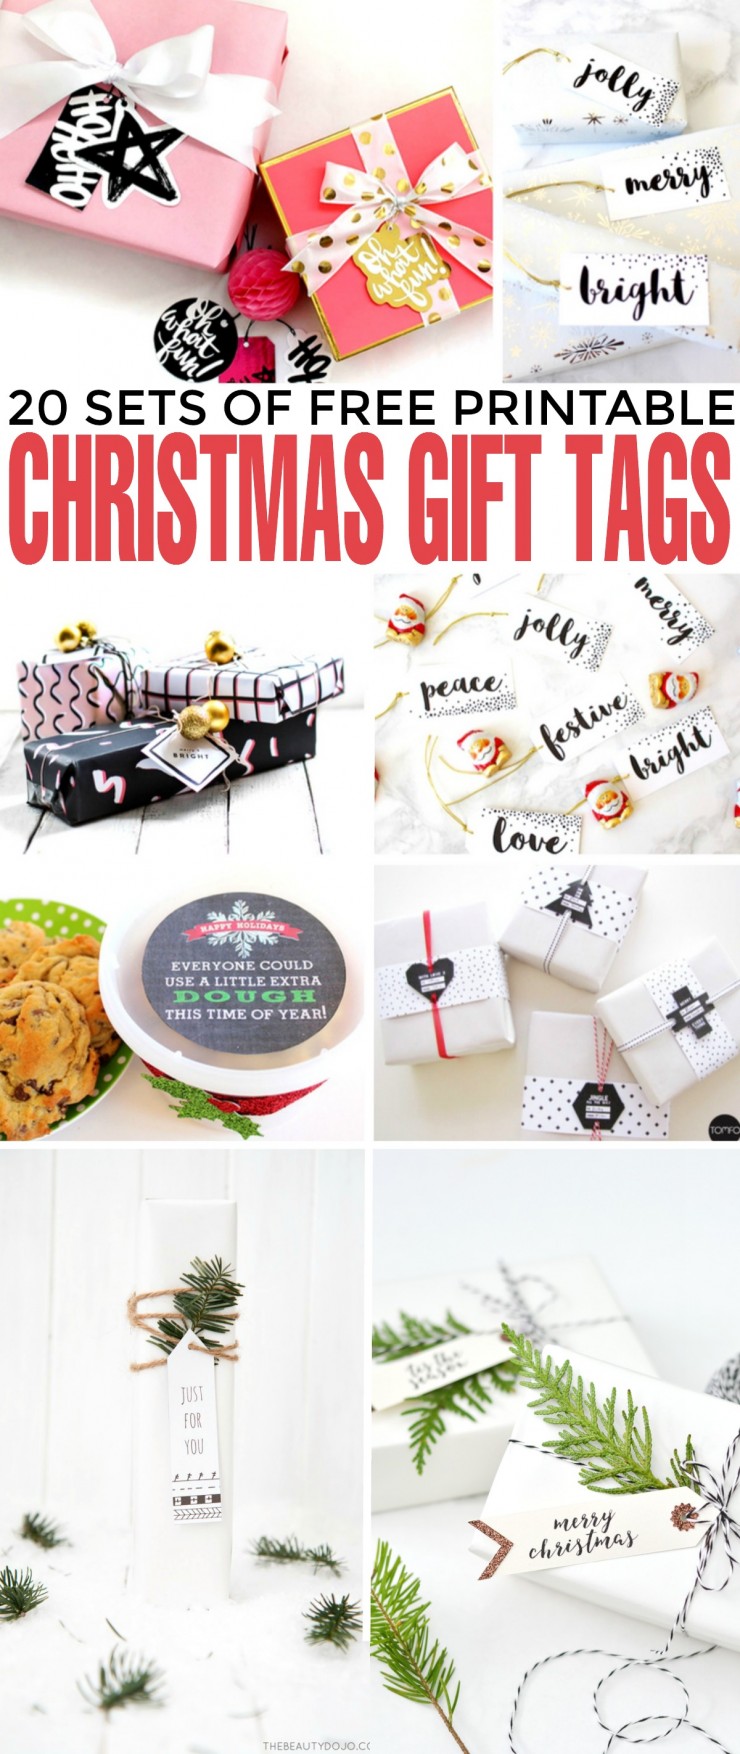 If you want to make your presents look wonderful this year, I put together a collection of 20 sets of free printable Christmas gift tags that will look great on your gifts.